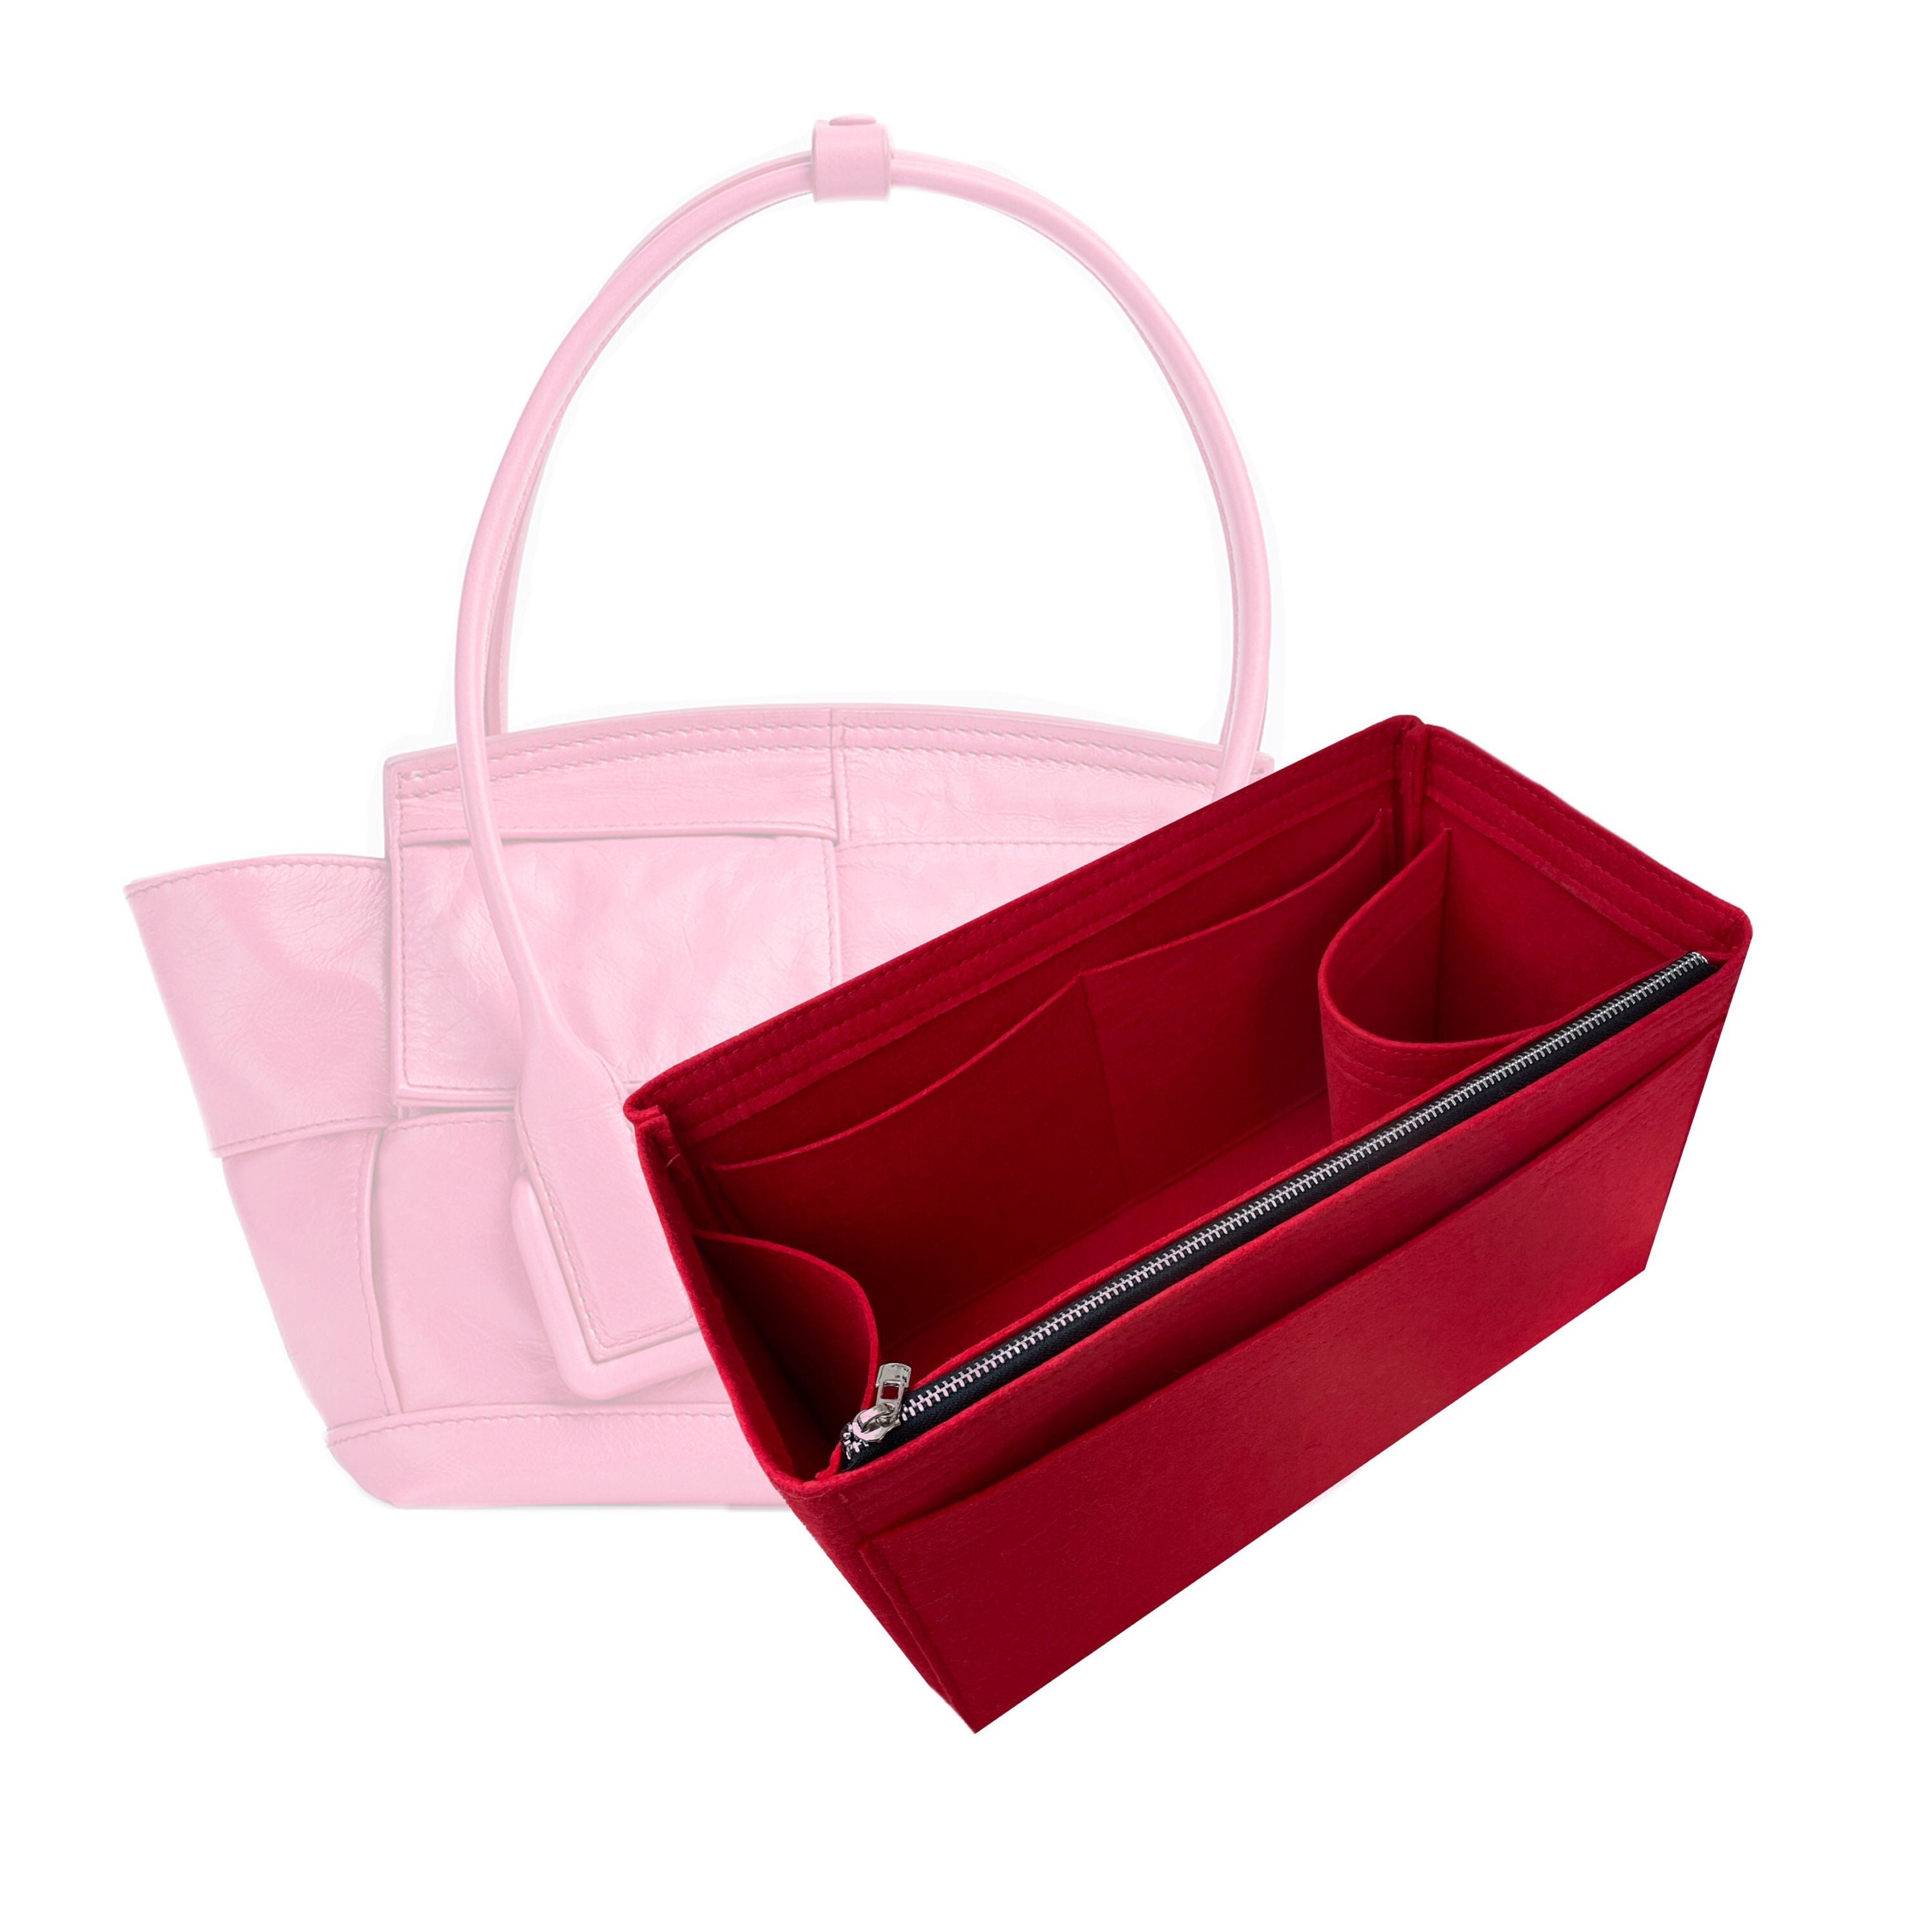 ON SALE / 12-8/ BV-Arco-Tote-41 / 2mm Red) Bag Organizer for BV